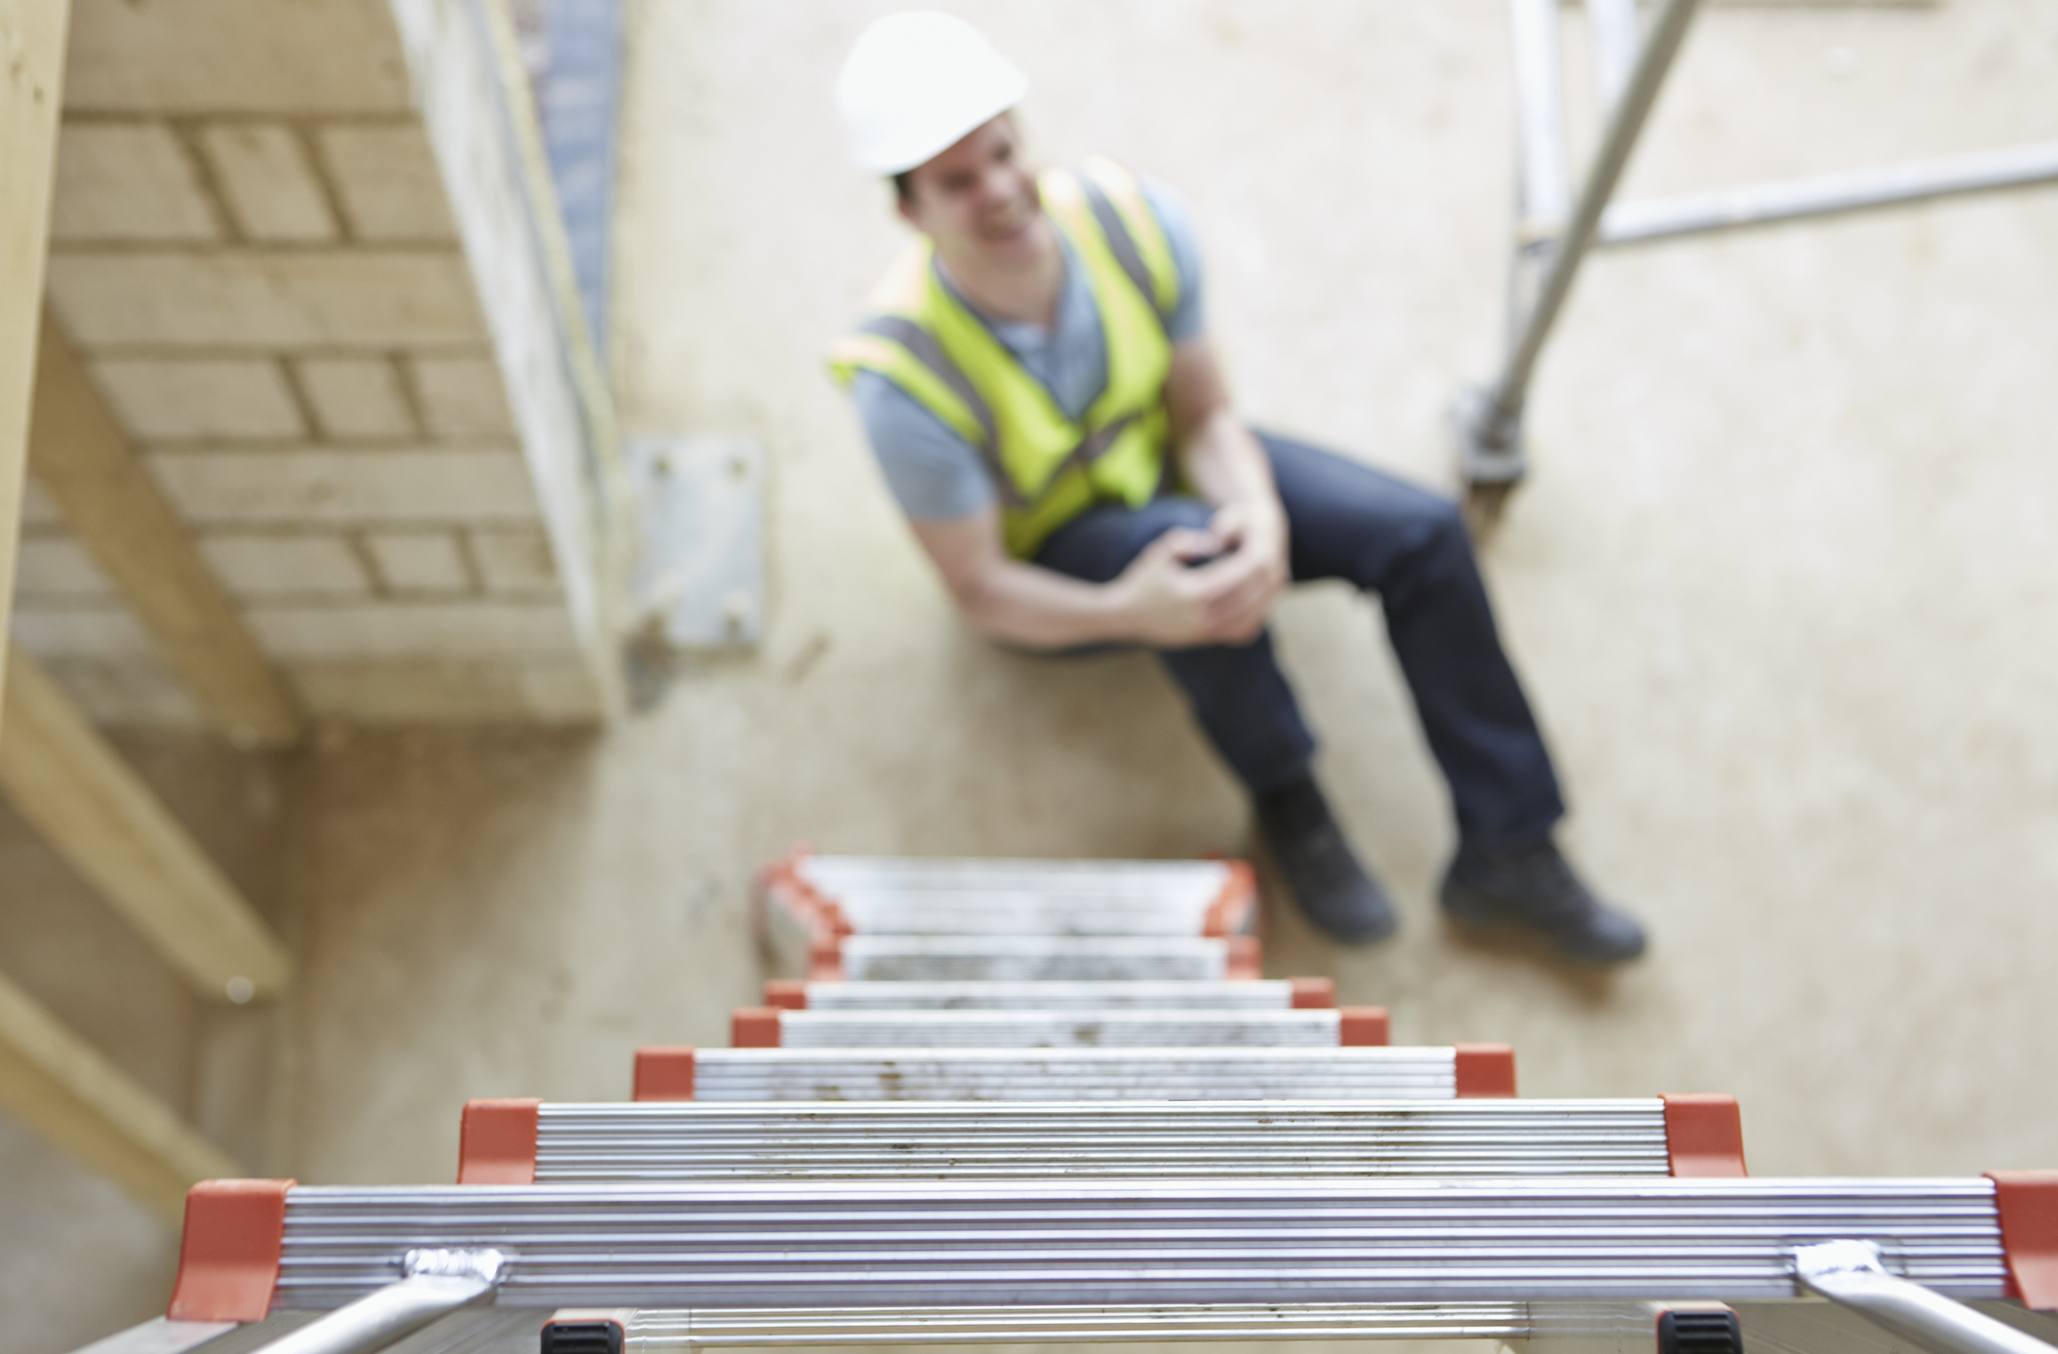 Workers' Compensation in California: What Business Owners Need to Know